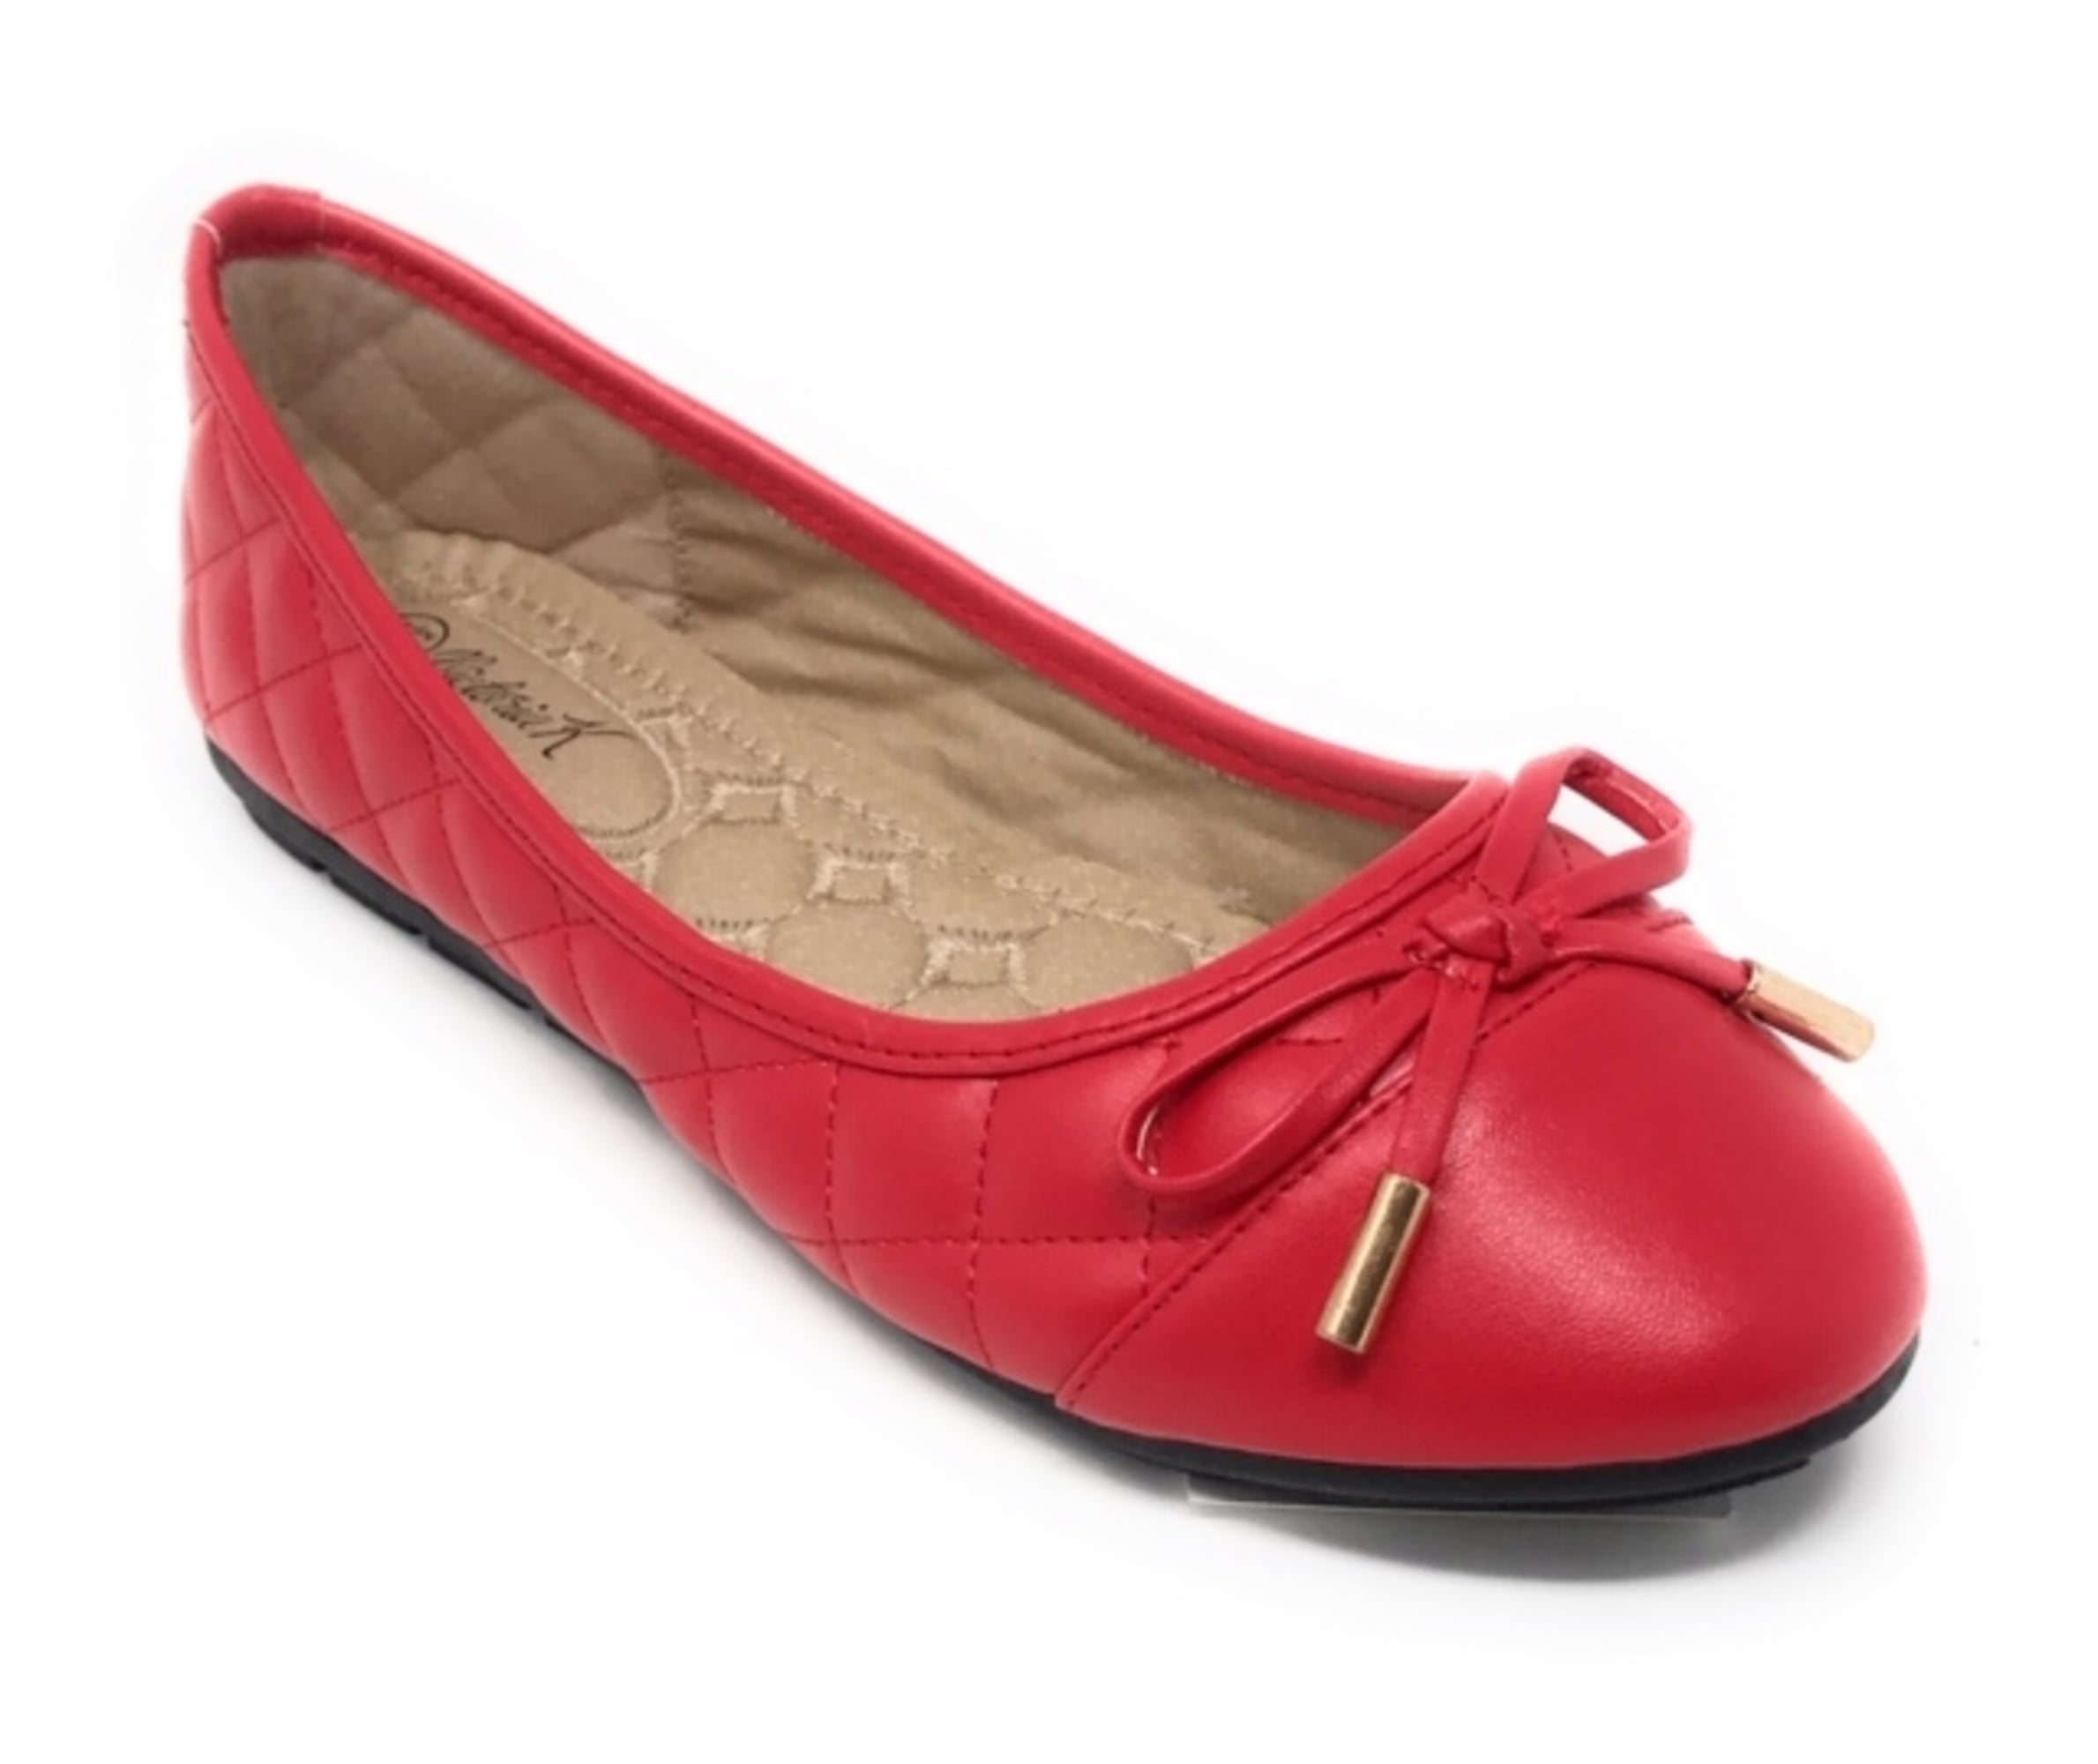 CuteFlats Women Cute Round Toe Flat Shoes with Bowtie Decorated